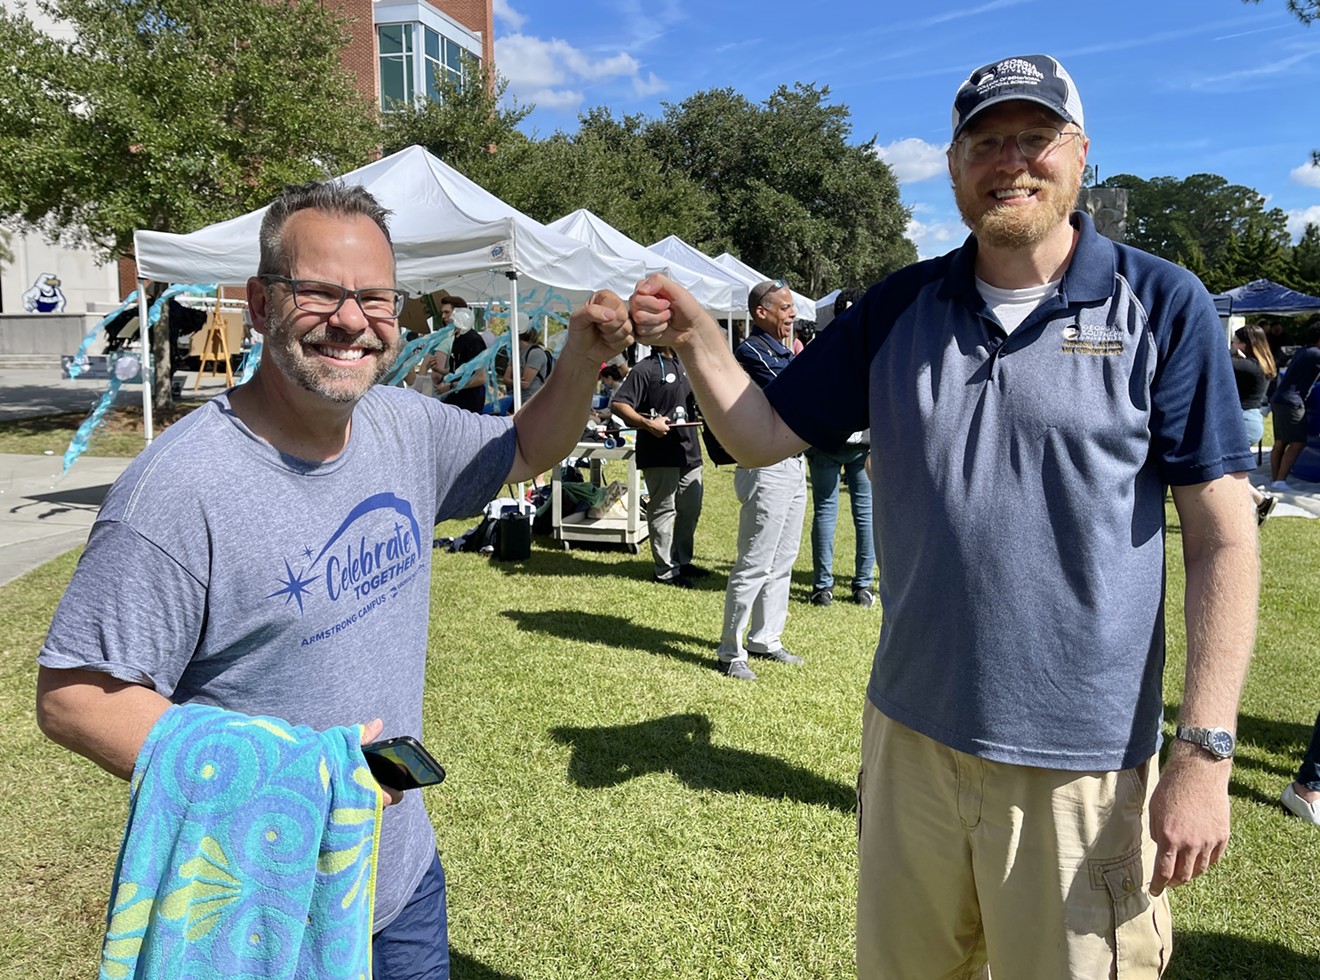 Georgia Southern University’s Celebrate Together event in Savannah